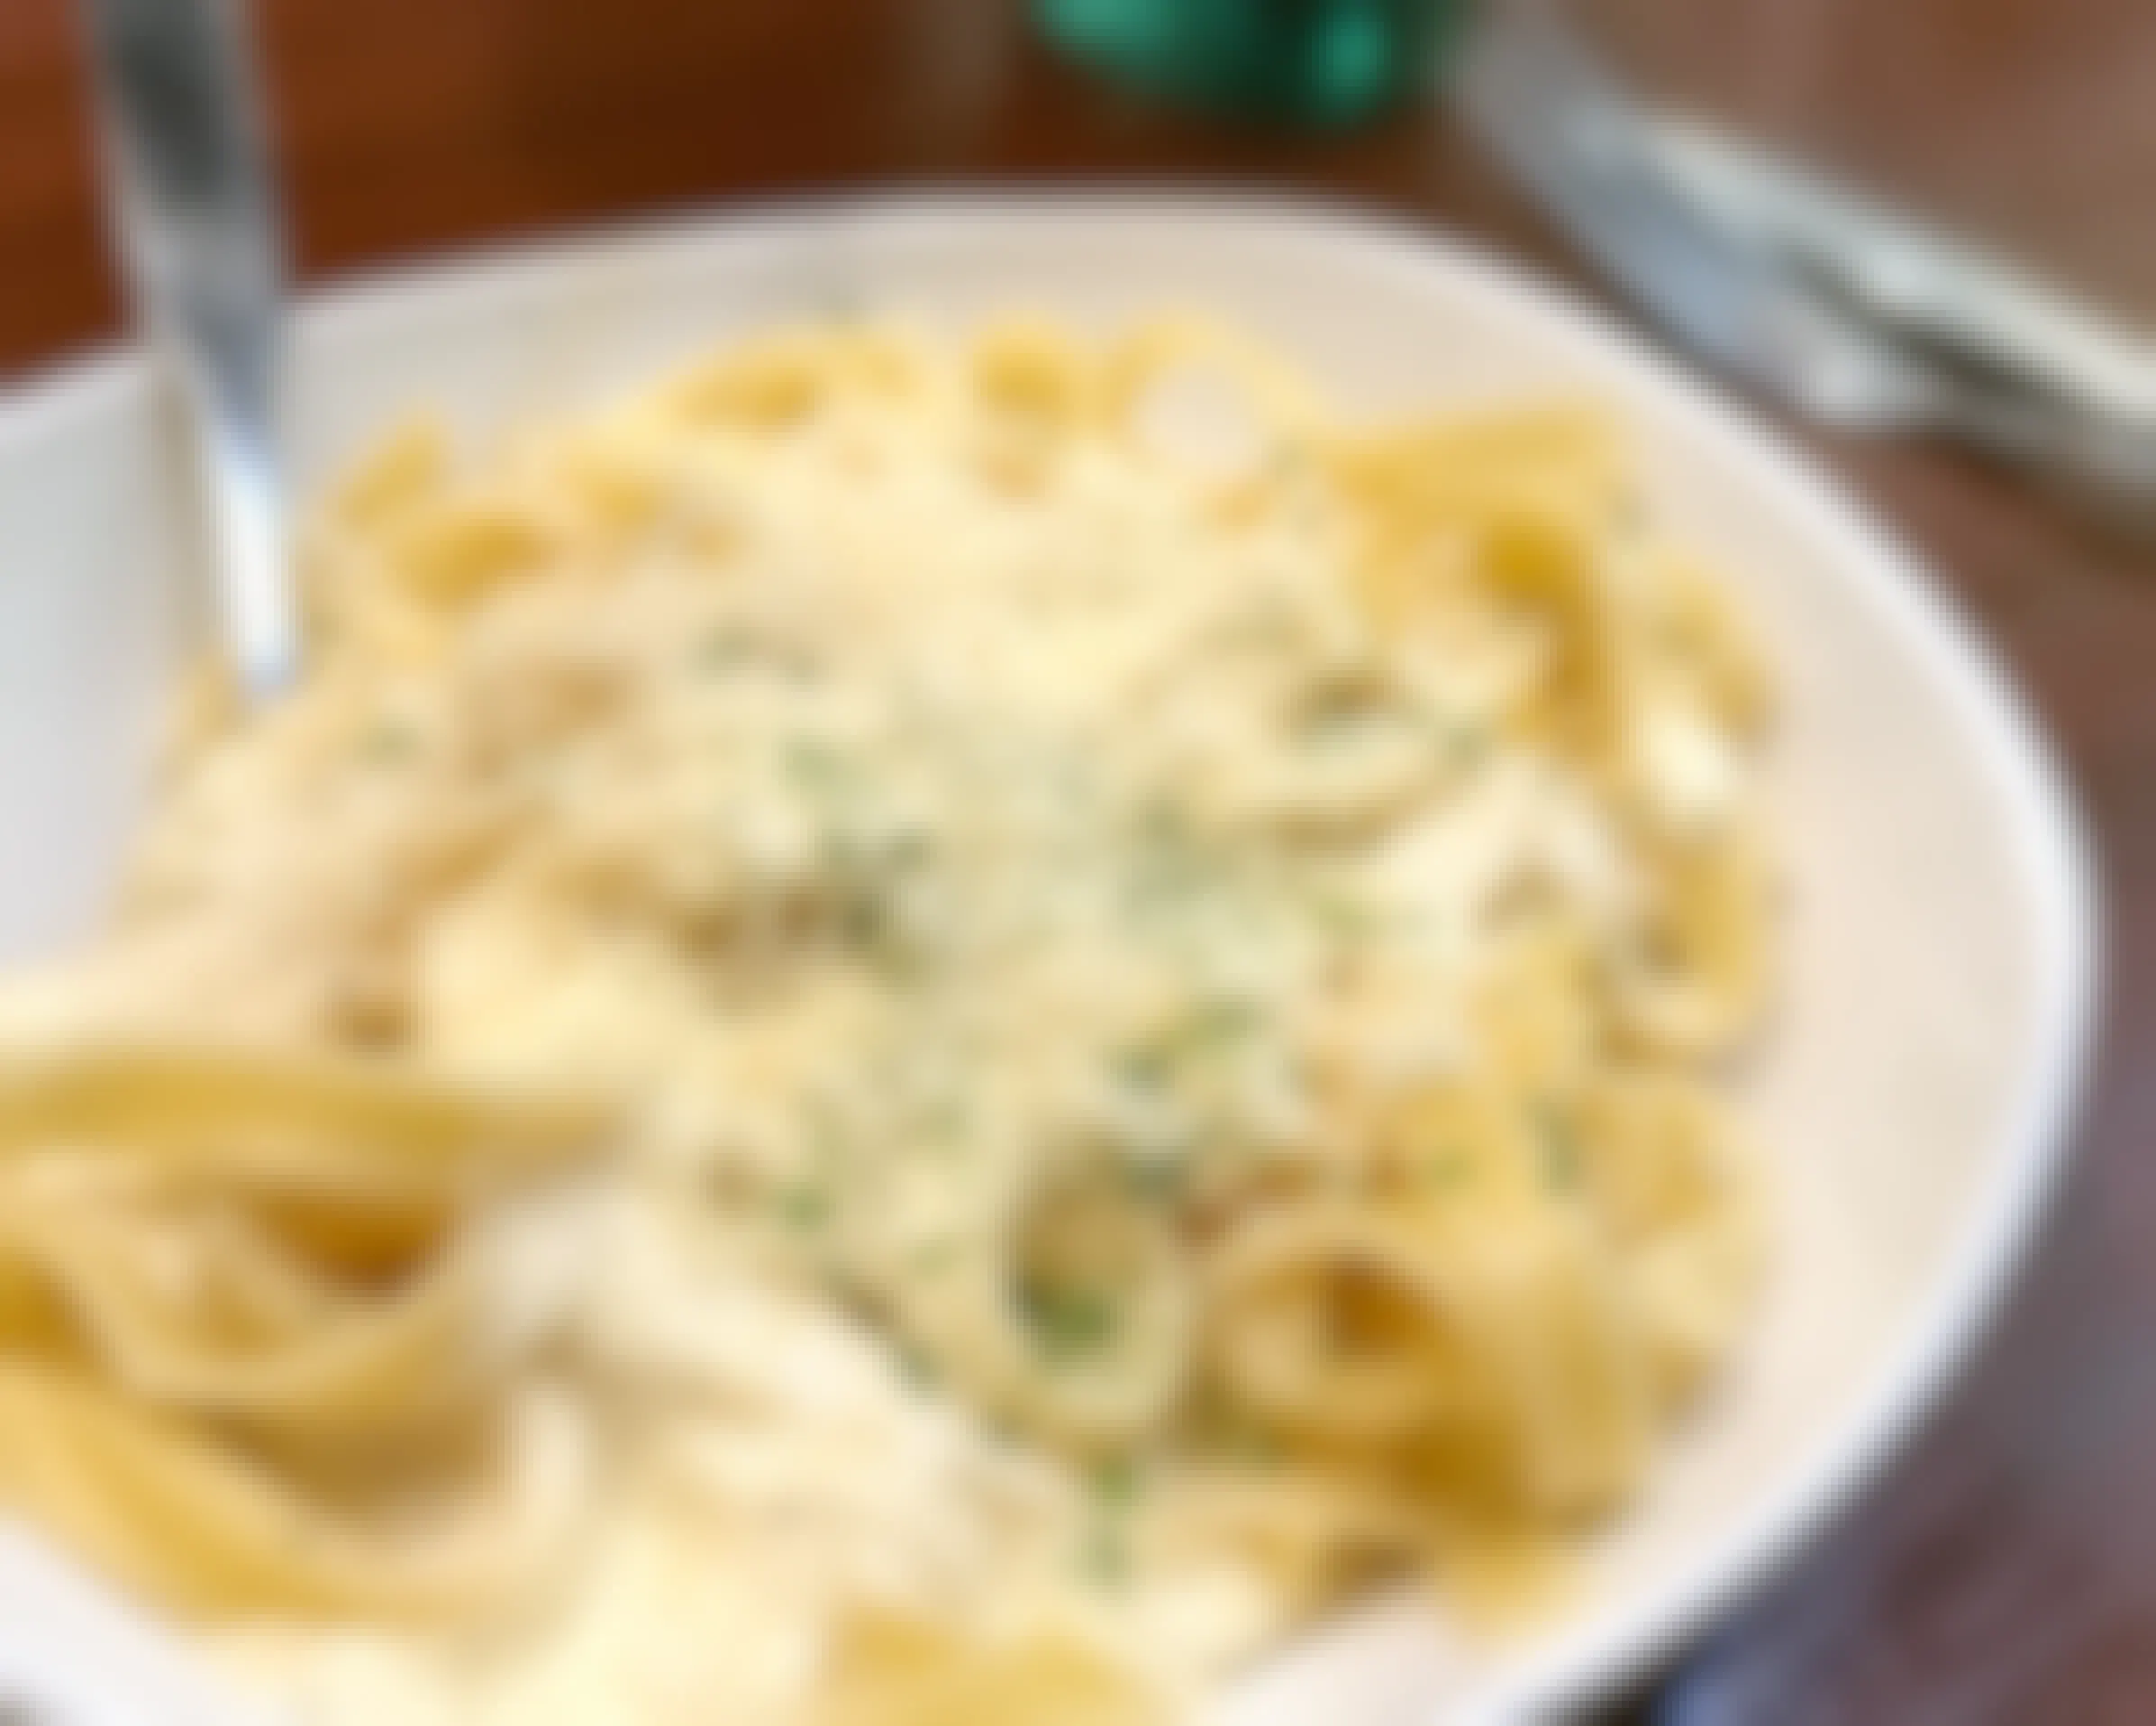 A close-up on a bowl of pasta from Olive Garden.